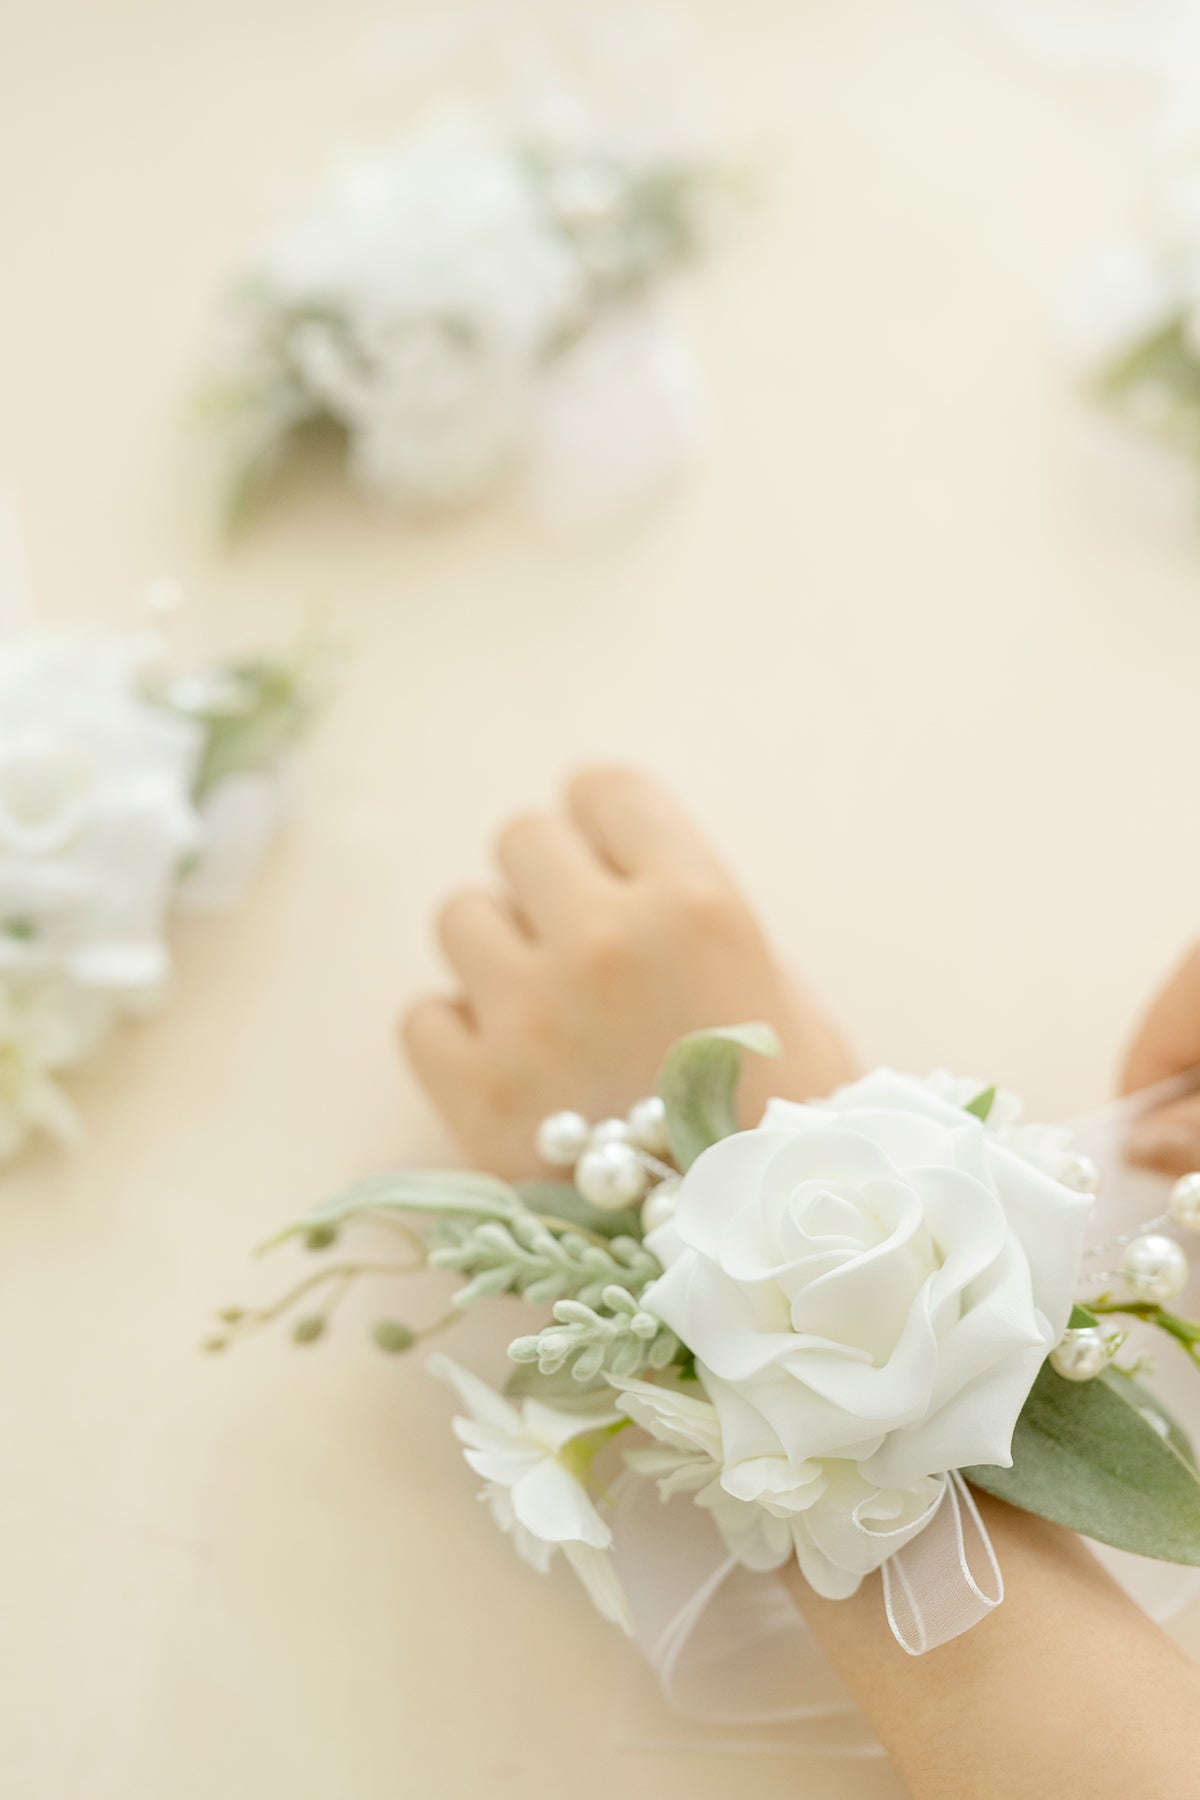 Are Wrist Corsages Still A Thing? How to Revive This Trend for Your We –  Ling's Moment